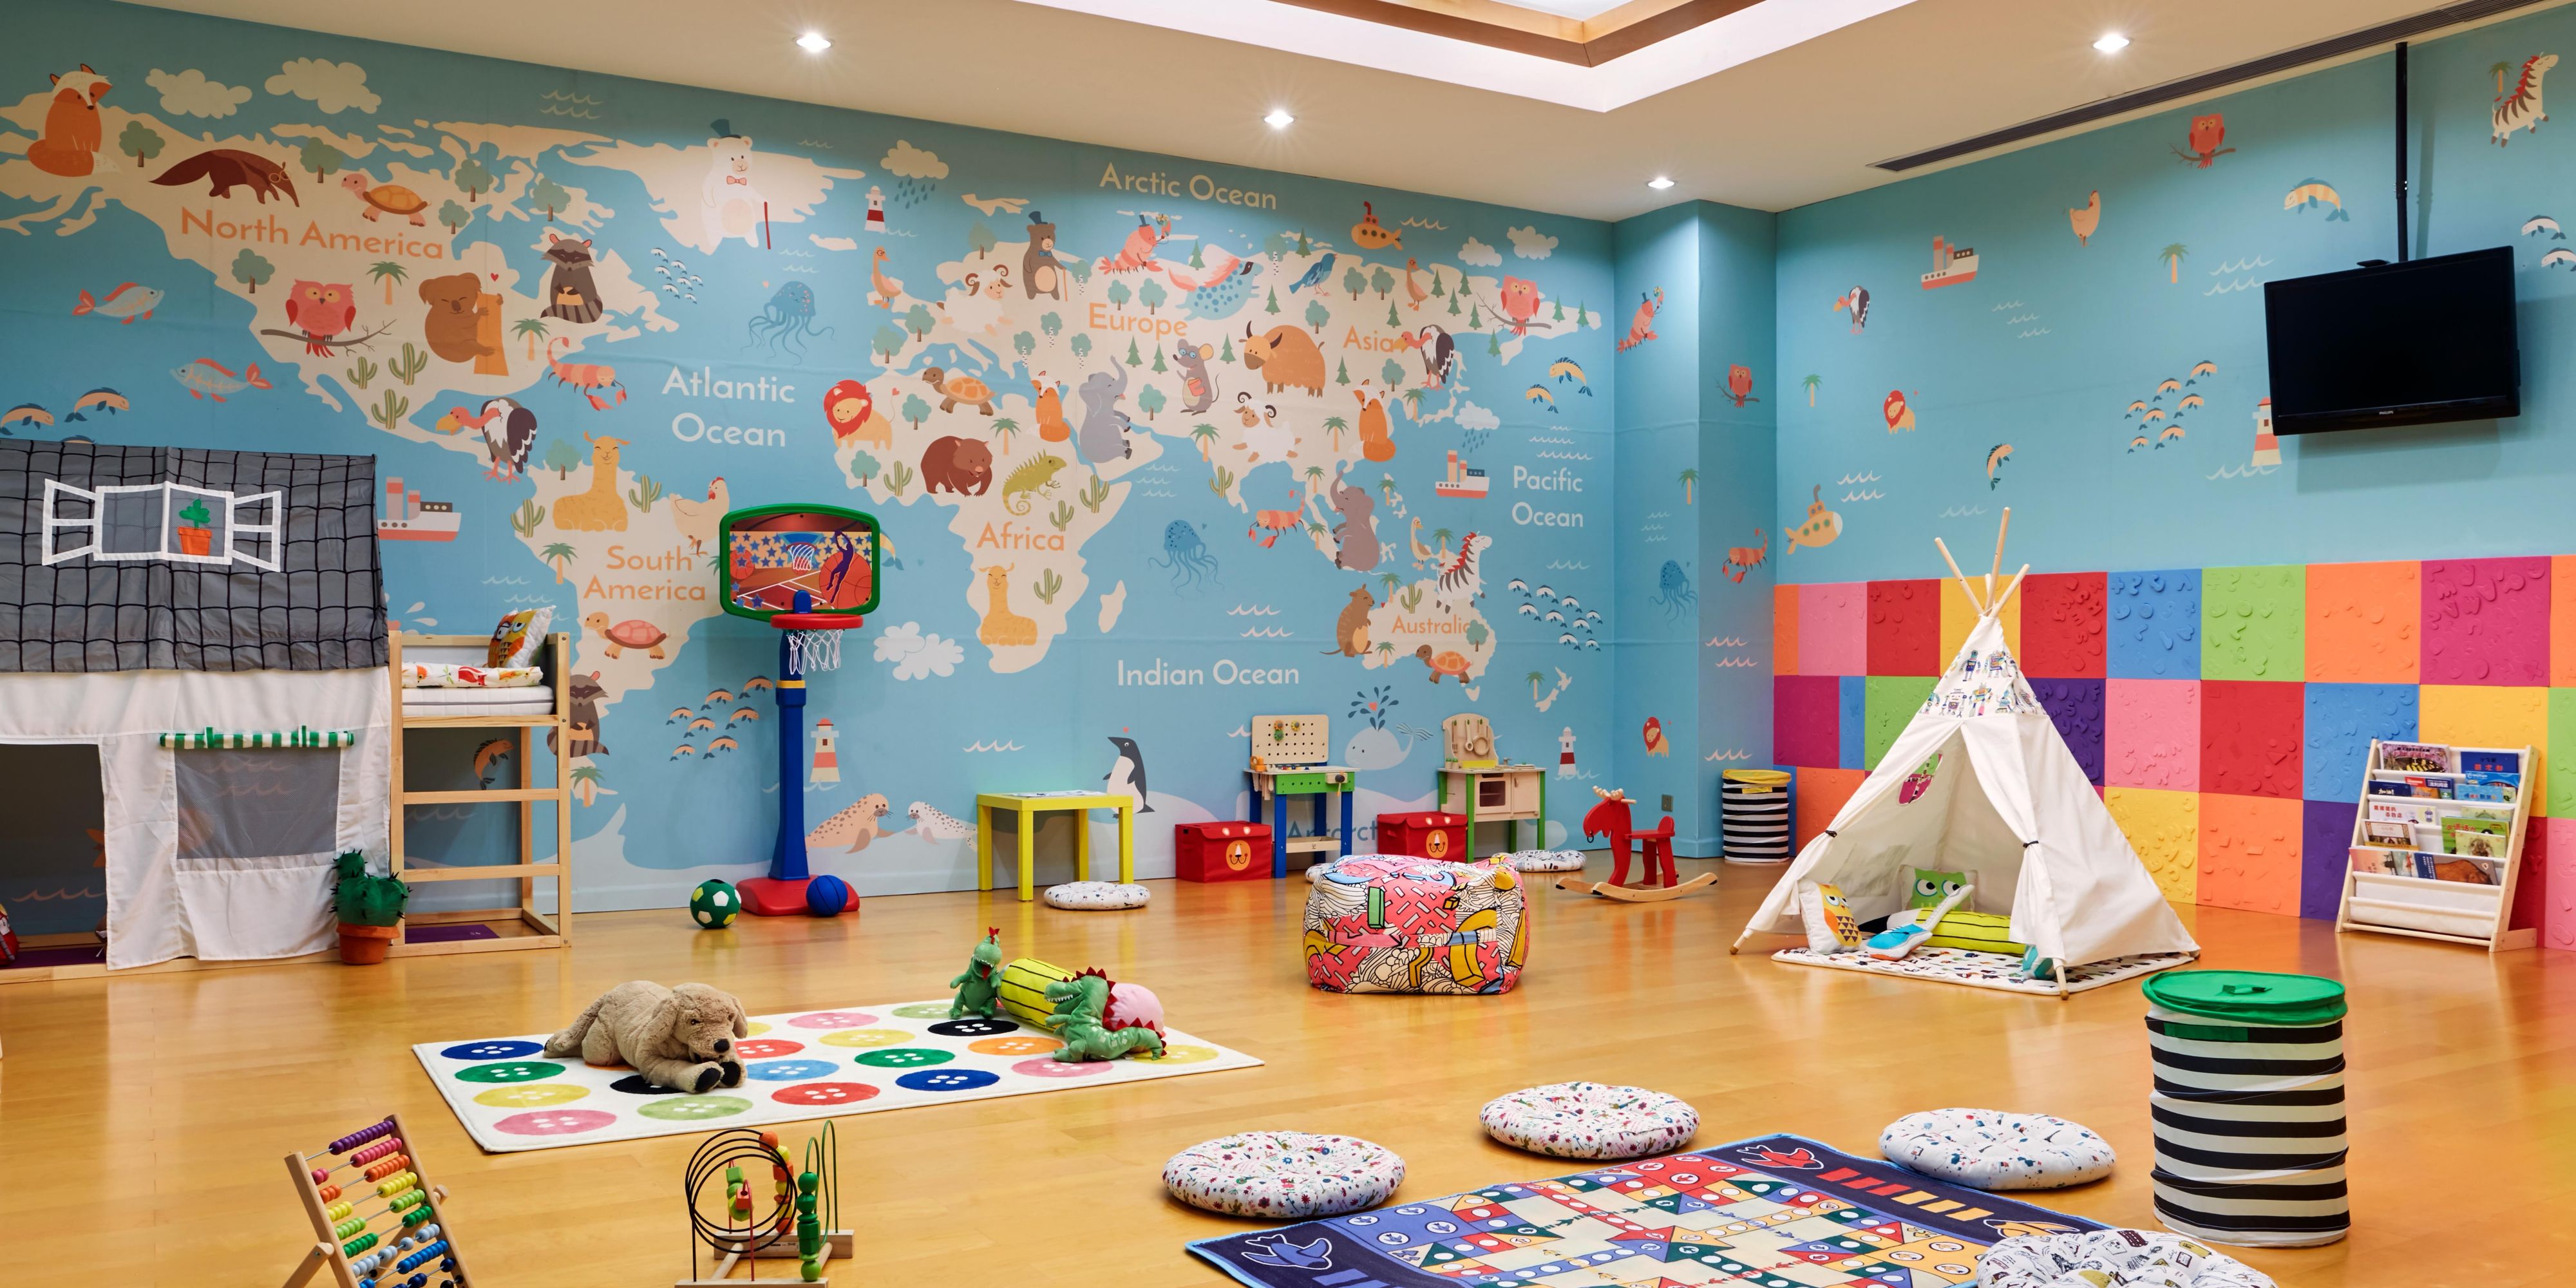 Located on the 3rd floor, Kids Club offers a variety of toys, dolls, TV programs and books for children to enjoy a wonderful happy time.